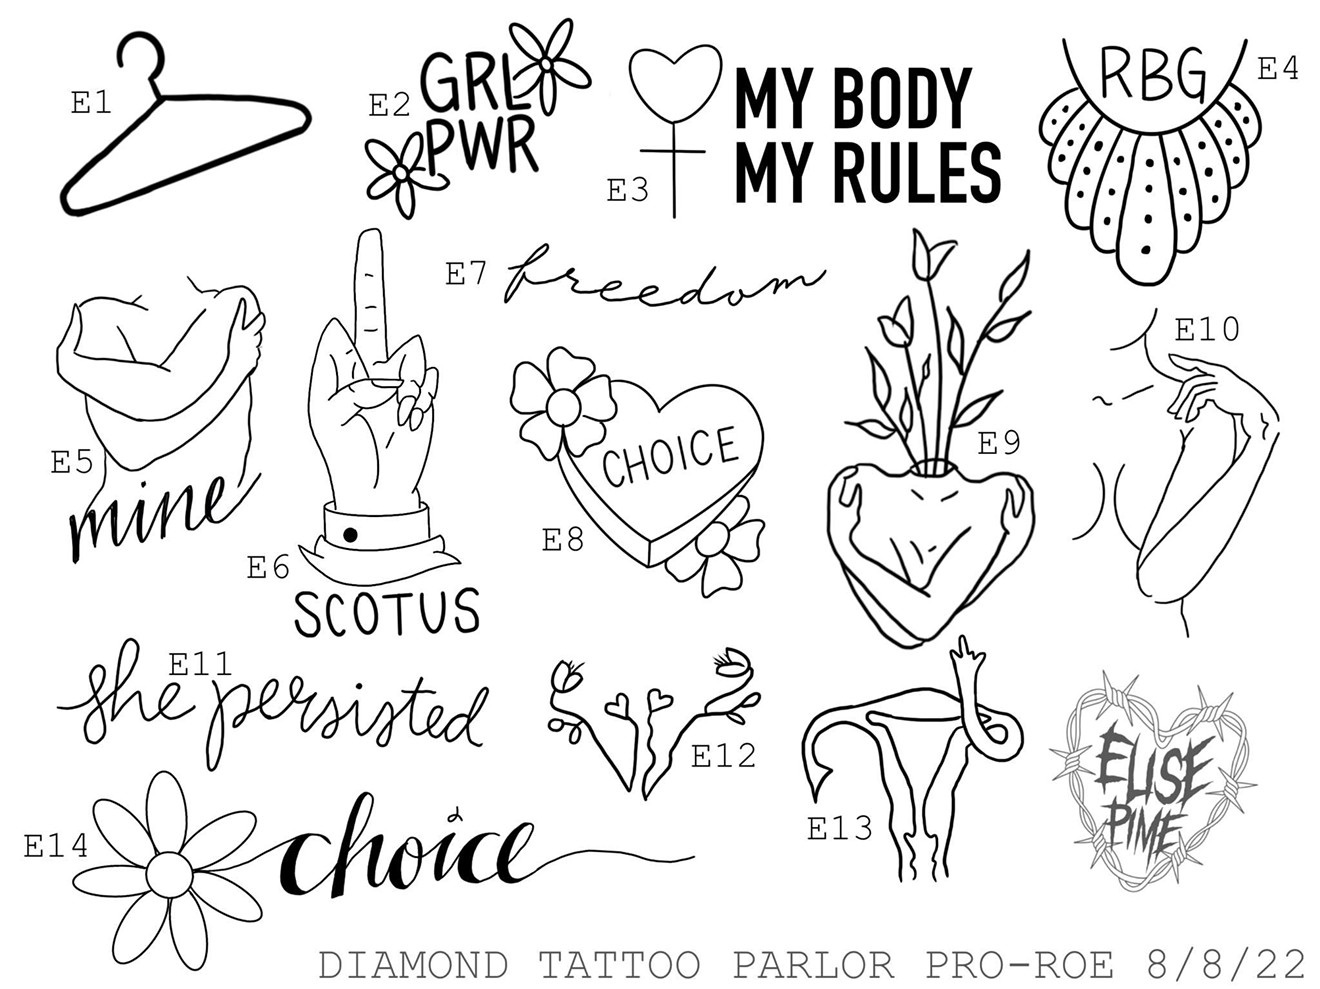 Diamond Tattoo in Hurst Offers Special Tattoos to Protest Abortion Ruling |  Dallas Observer